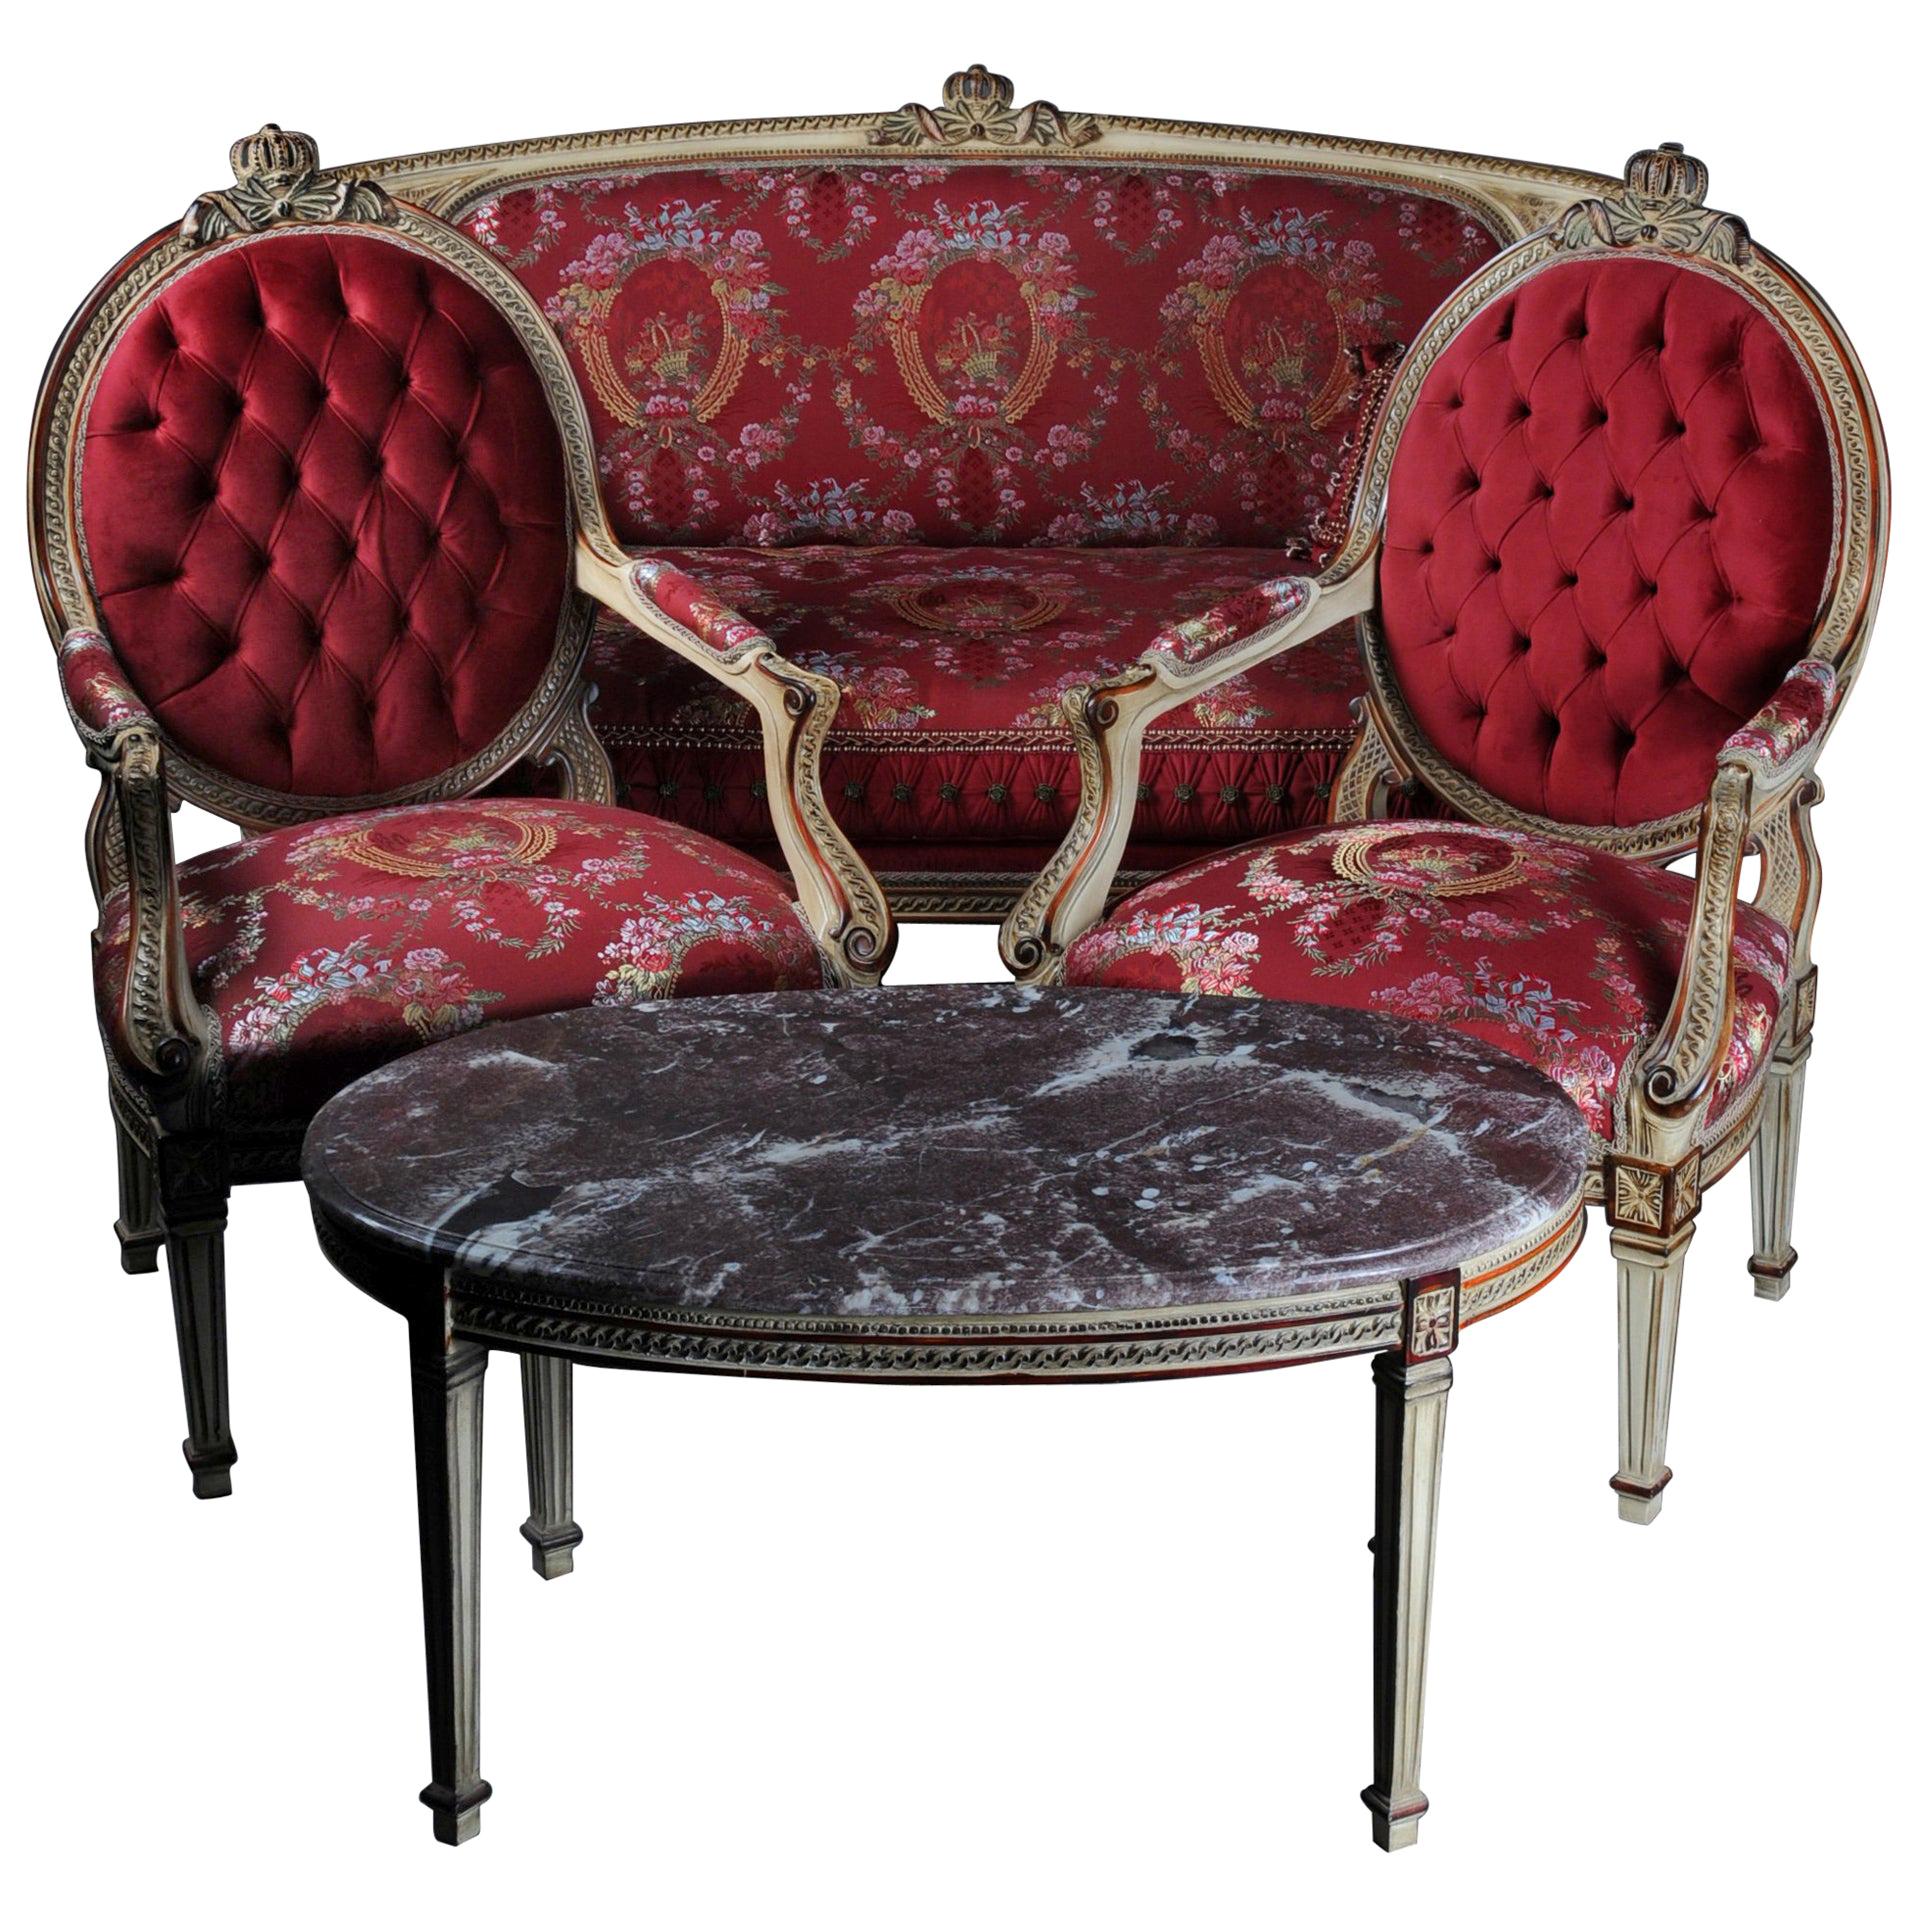 Unique Seating Group, Set with Oval Table in Louis XVI Seize